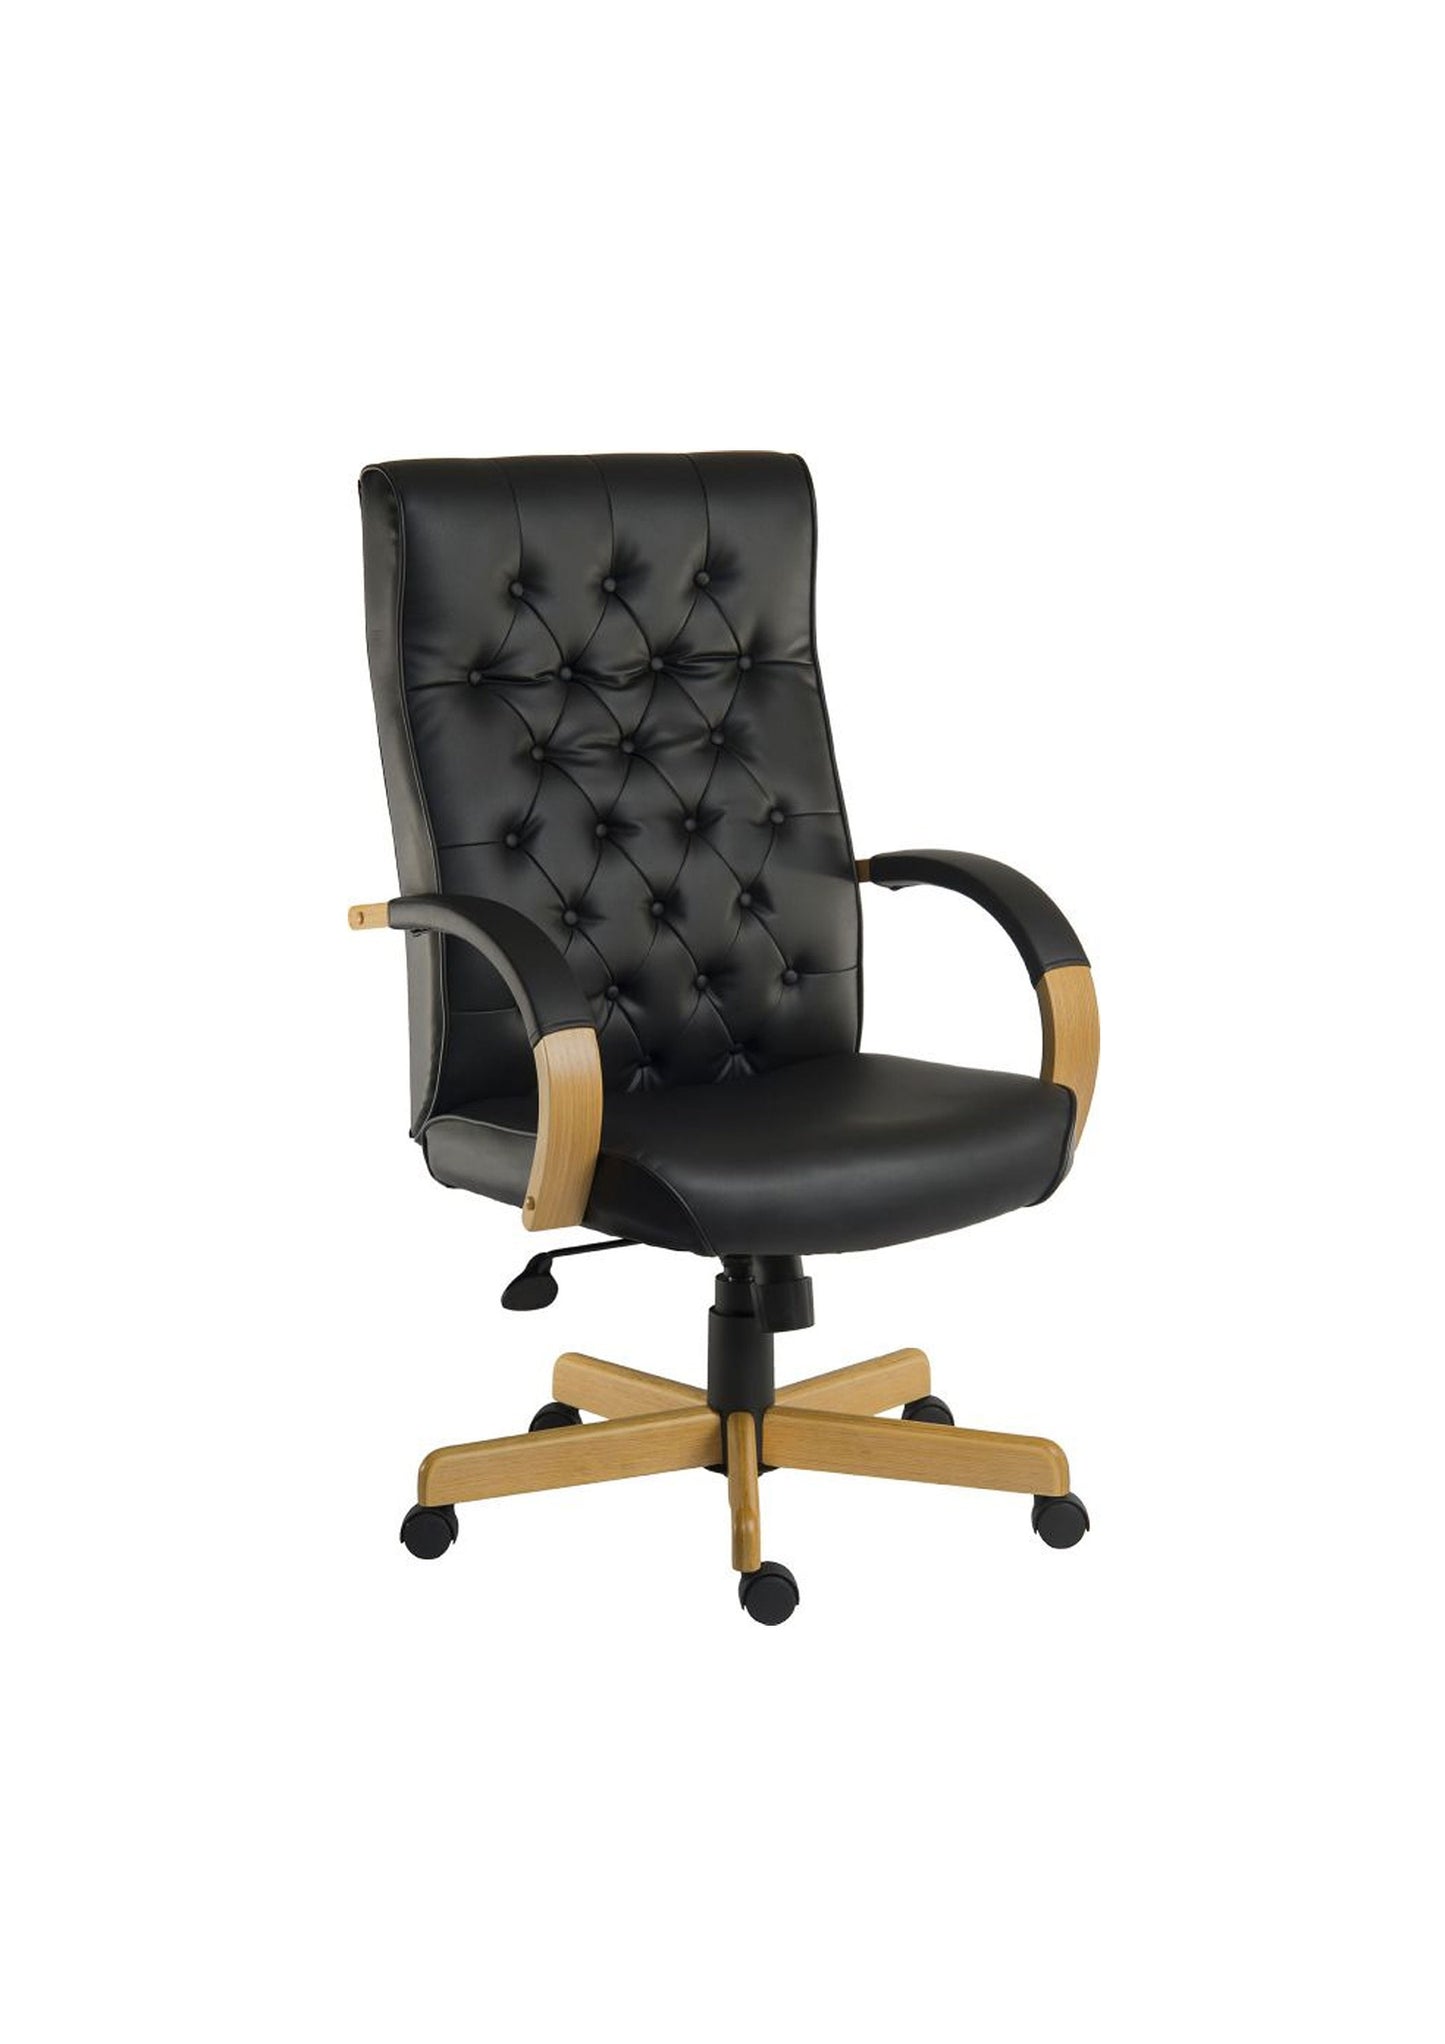 Traditional bonded leather faced executive armchair Black